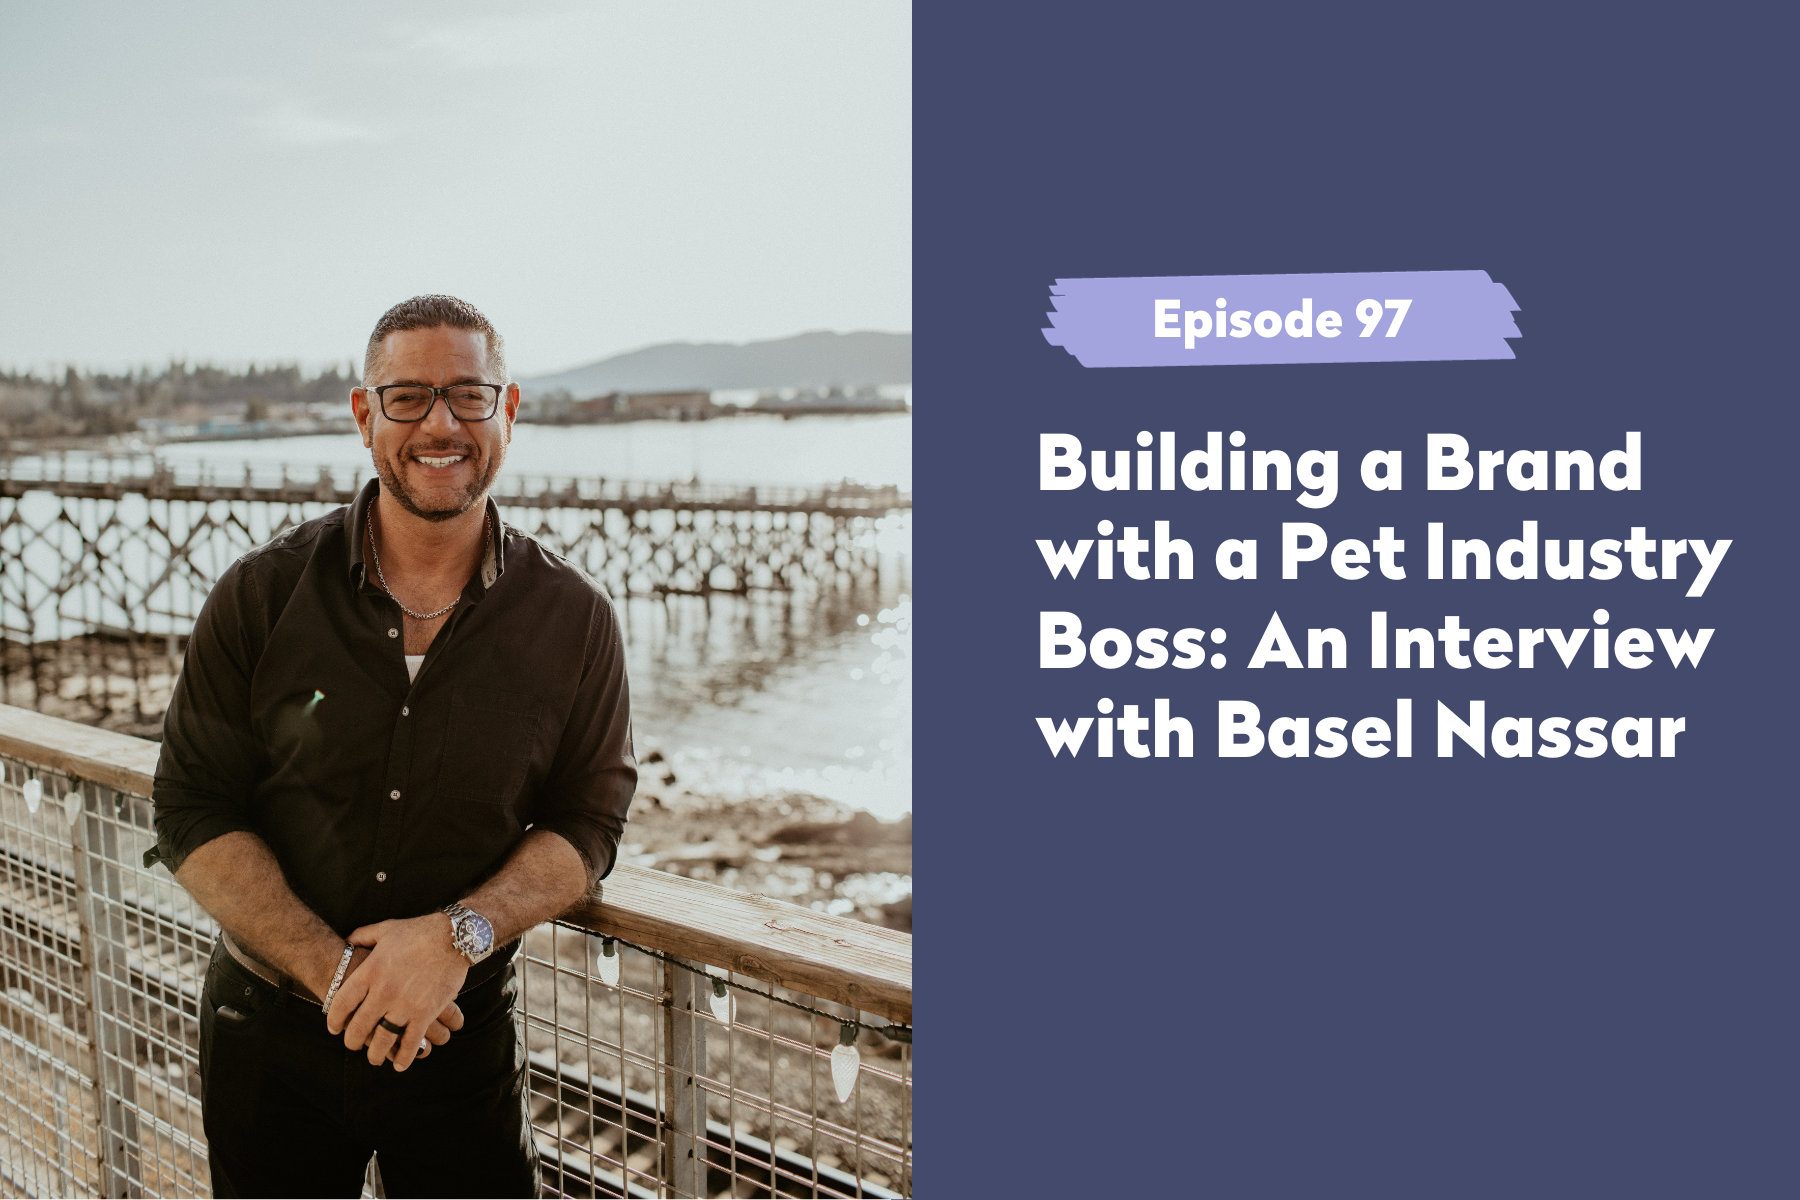 Episode 97 | Building a Brand with a Pet Industry Boss: An Interview with Basel Nassar